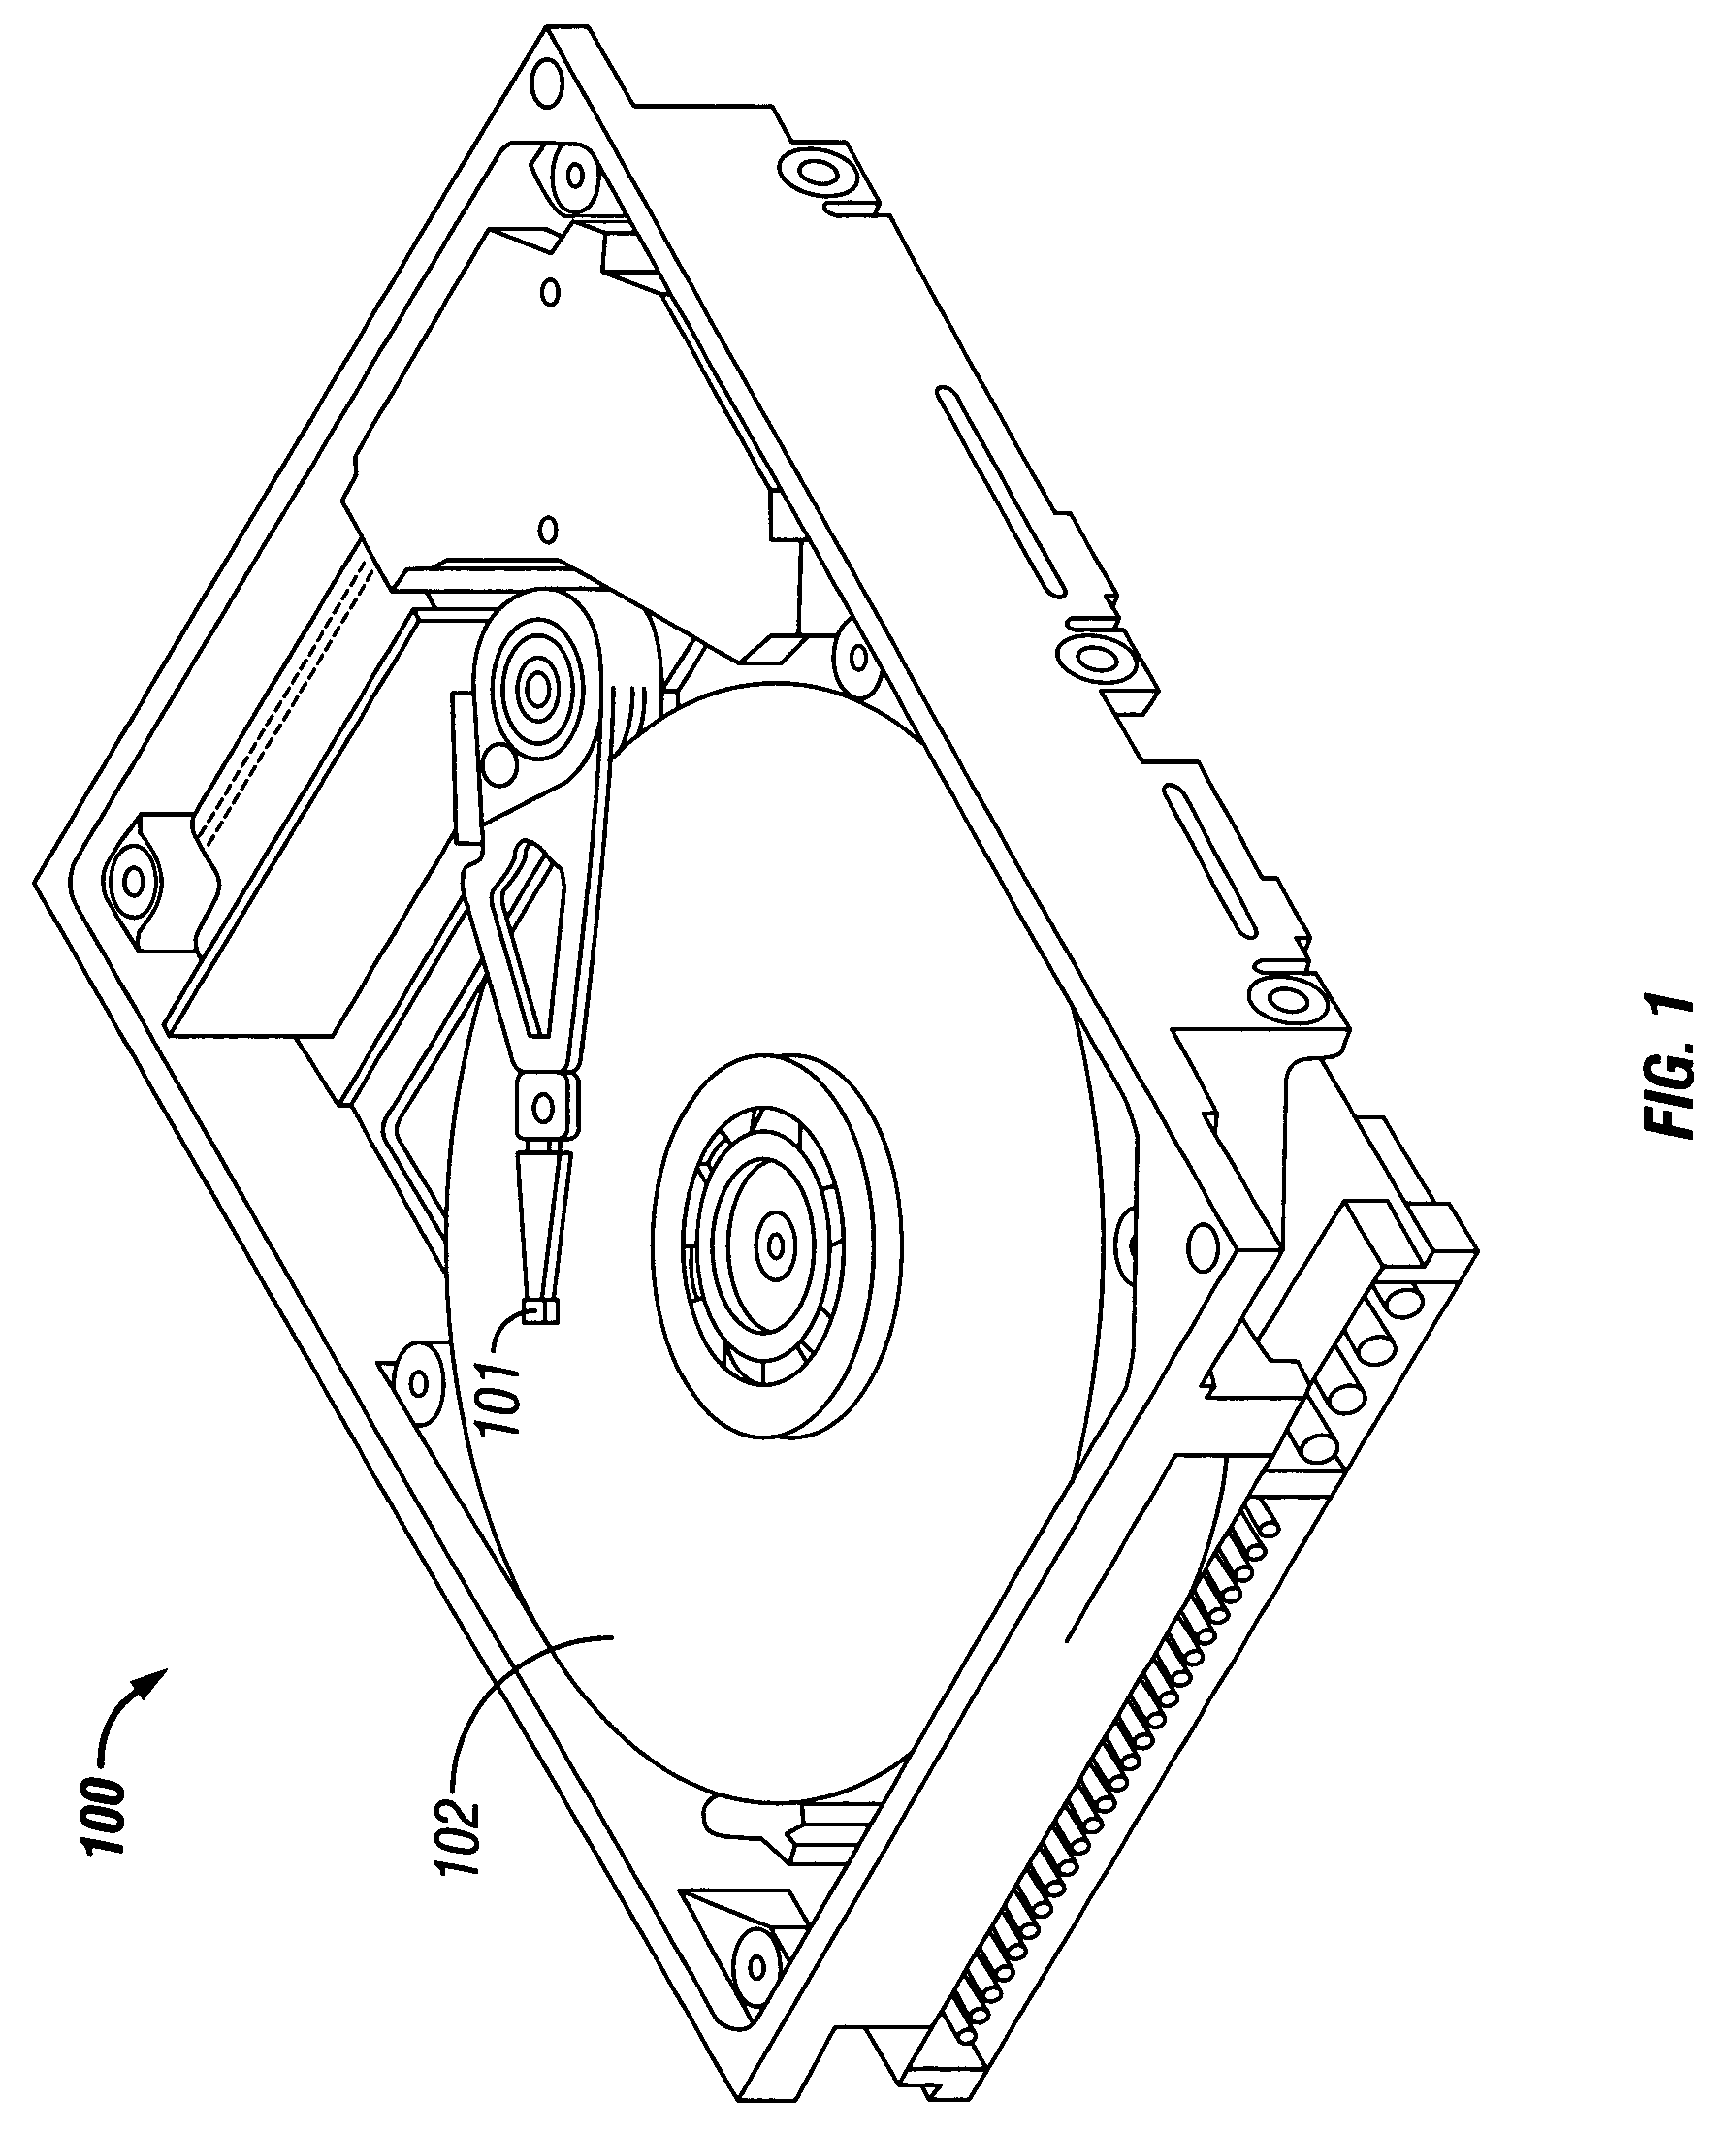 Disk drive with head-disk interaction sensor integrated with suspension